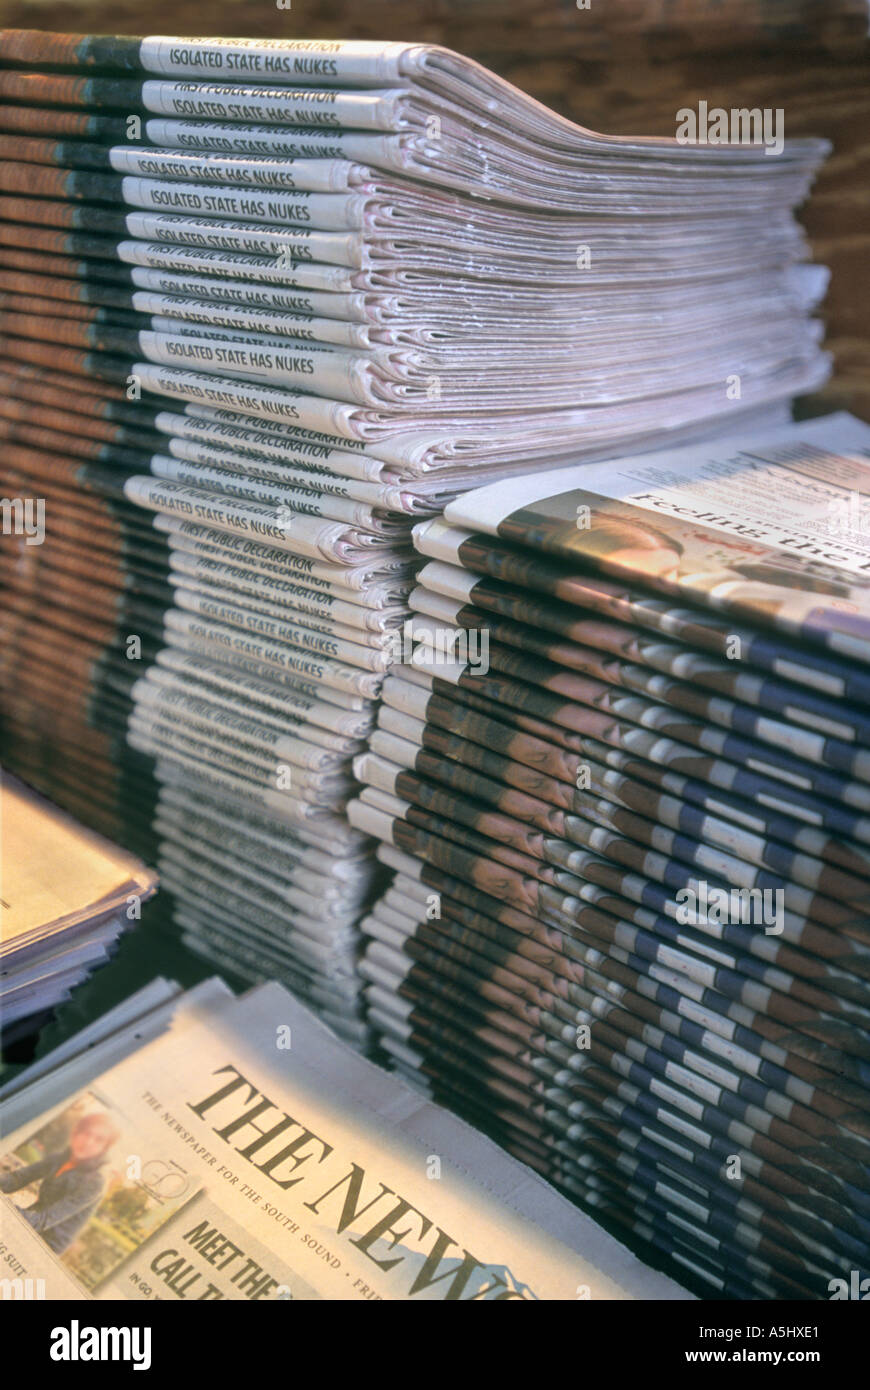 STACKS OF NEWSPAPERS AT NEWSSTAND SEATTLE  WASHINGTON USA Stock Photo